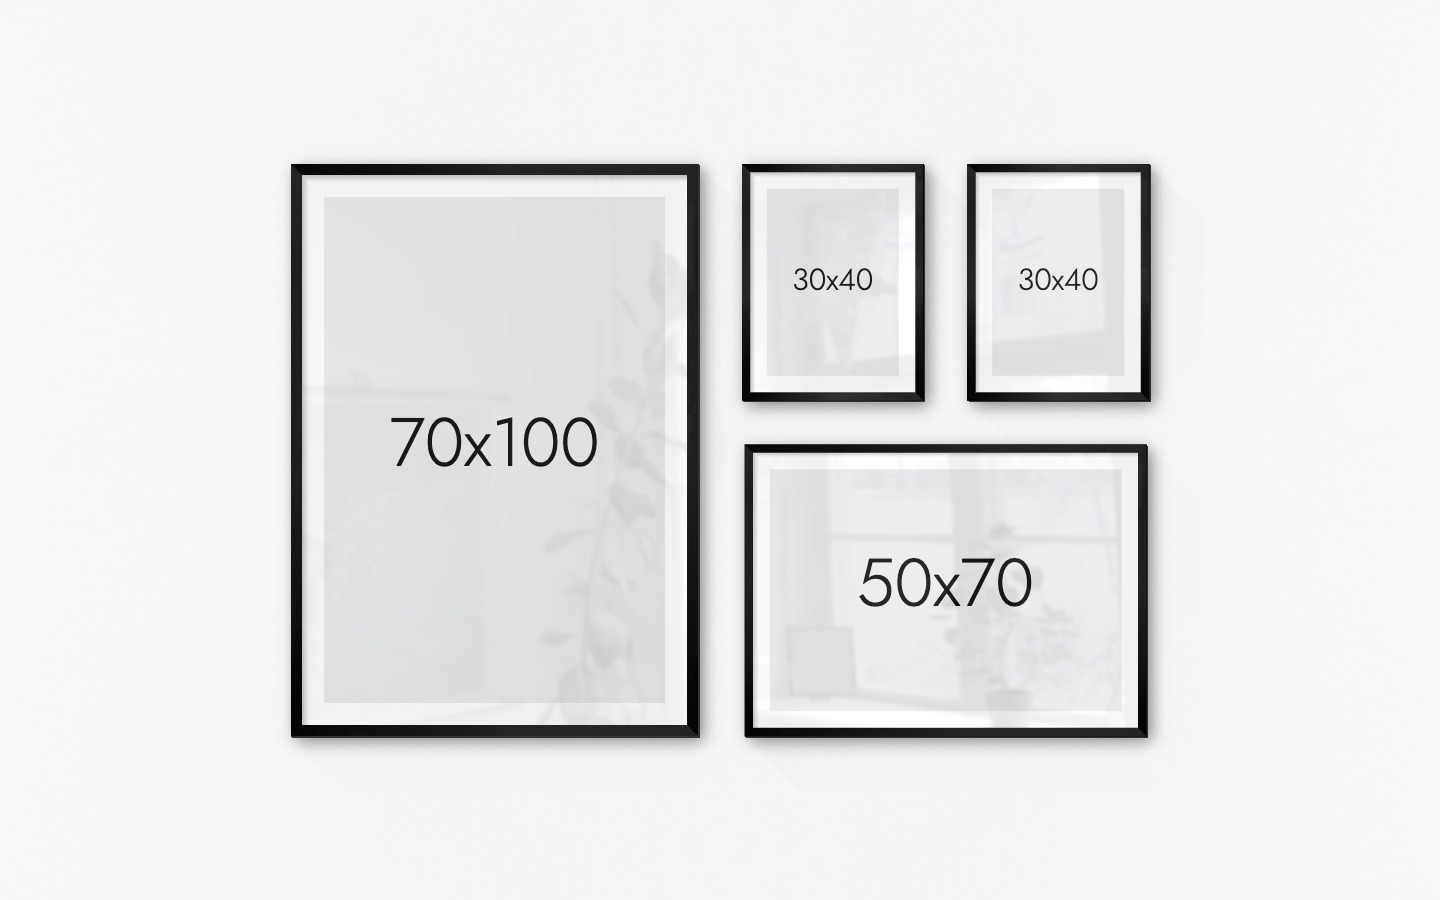 Gallery wall with picture frames in black in sizes 70x100, 30x40 and 50x70